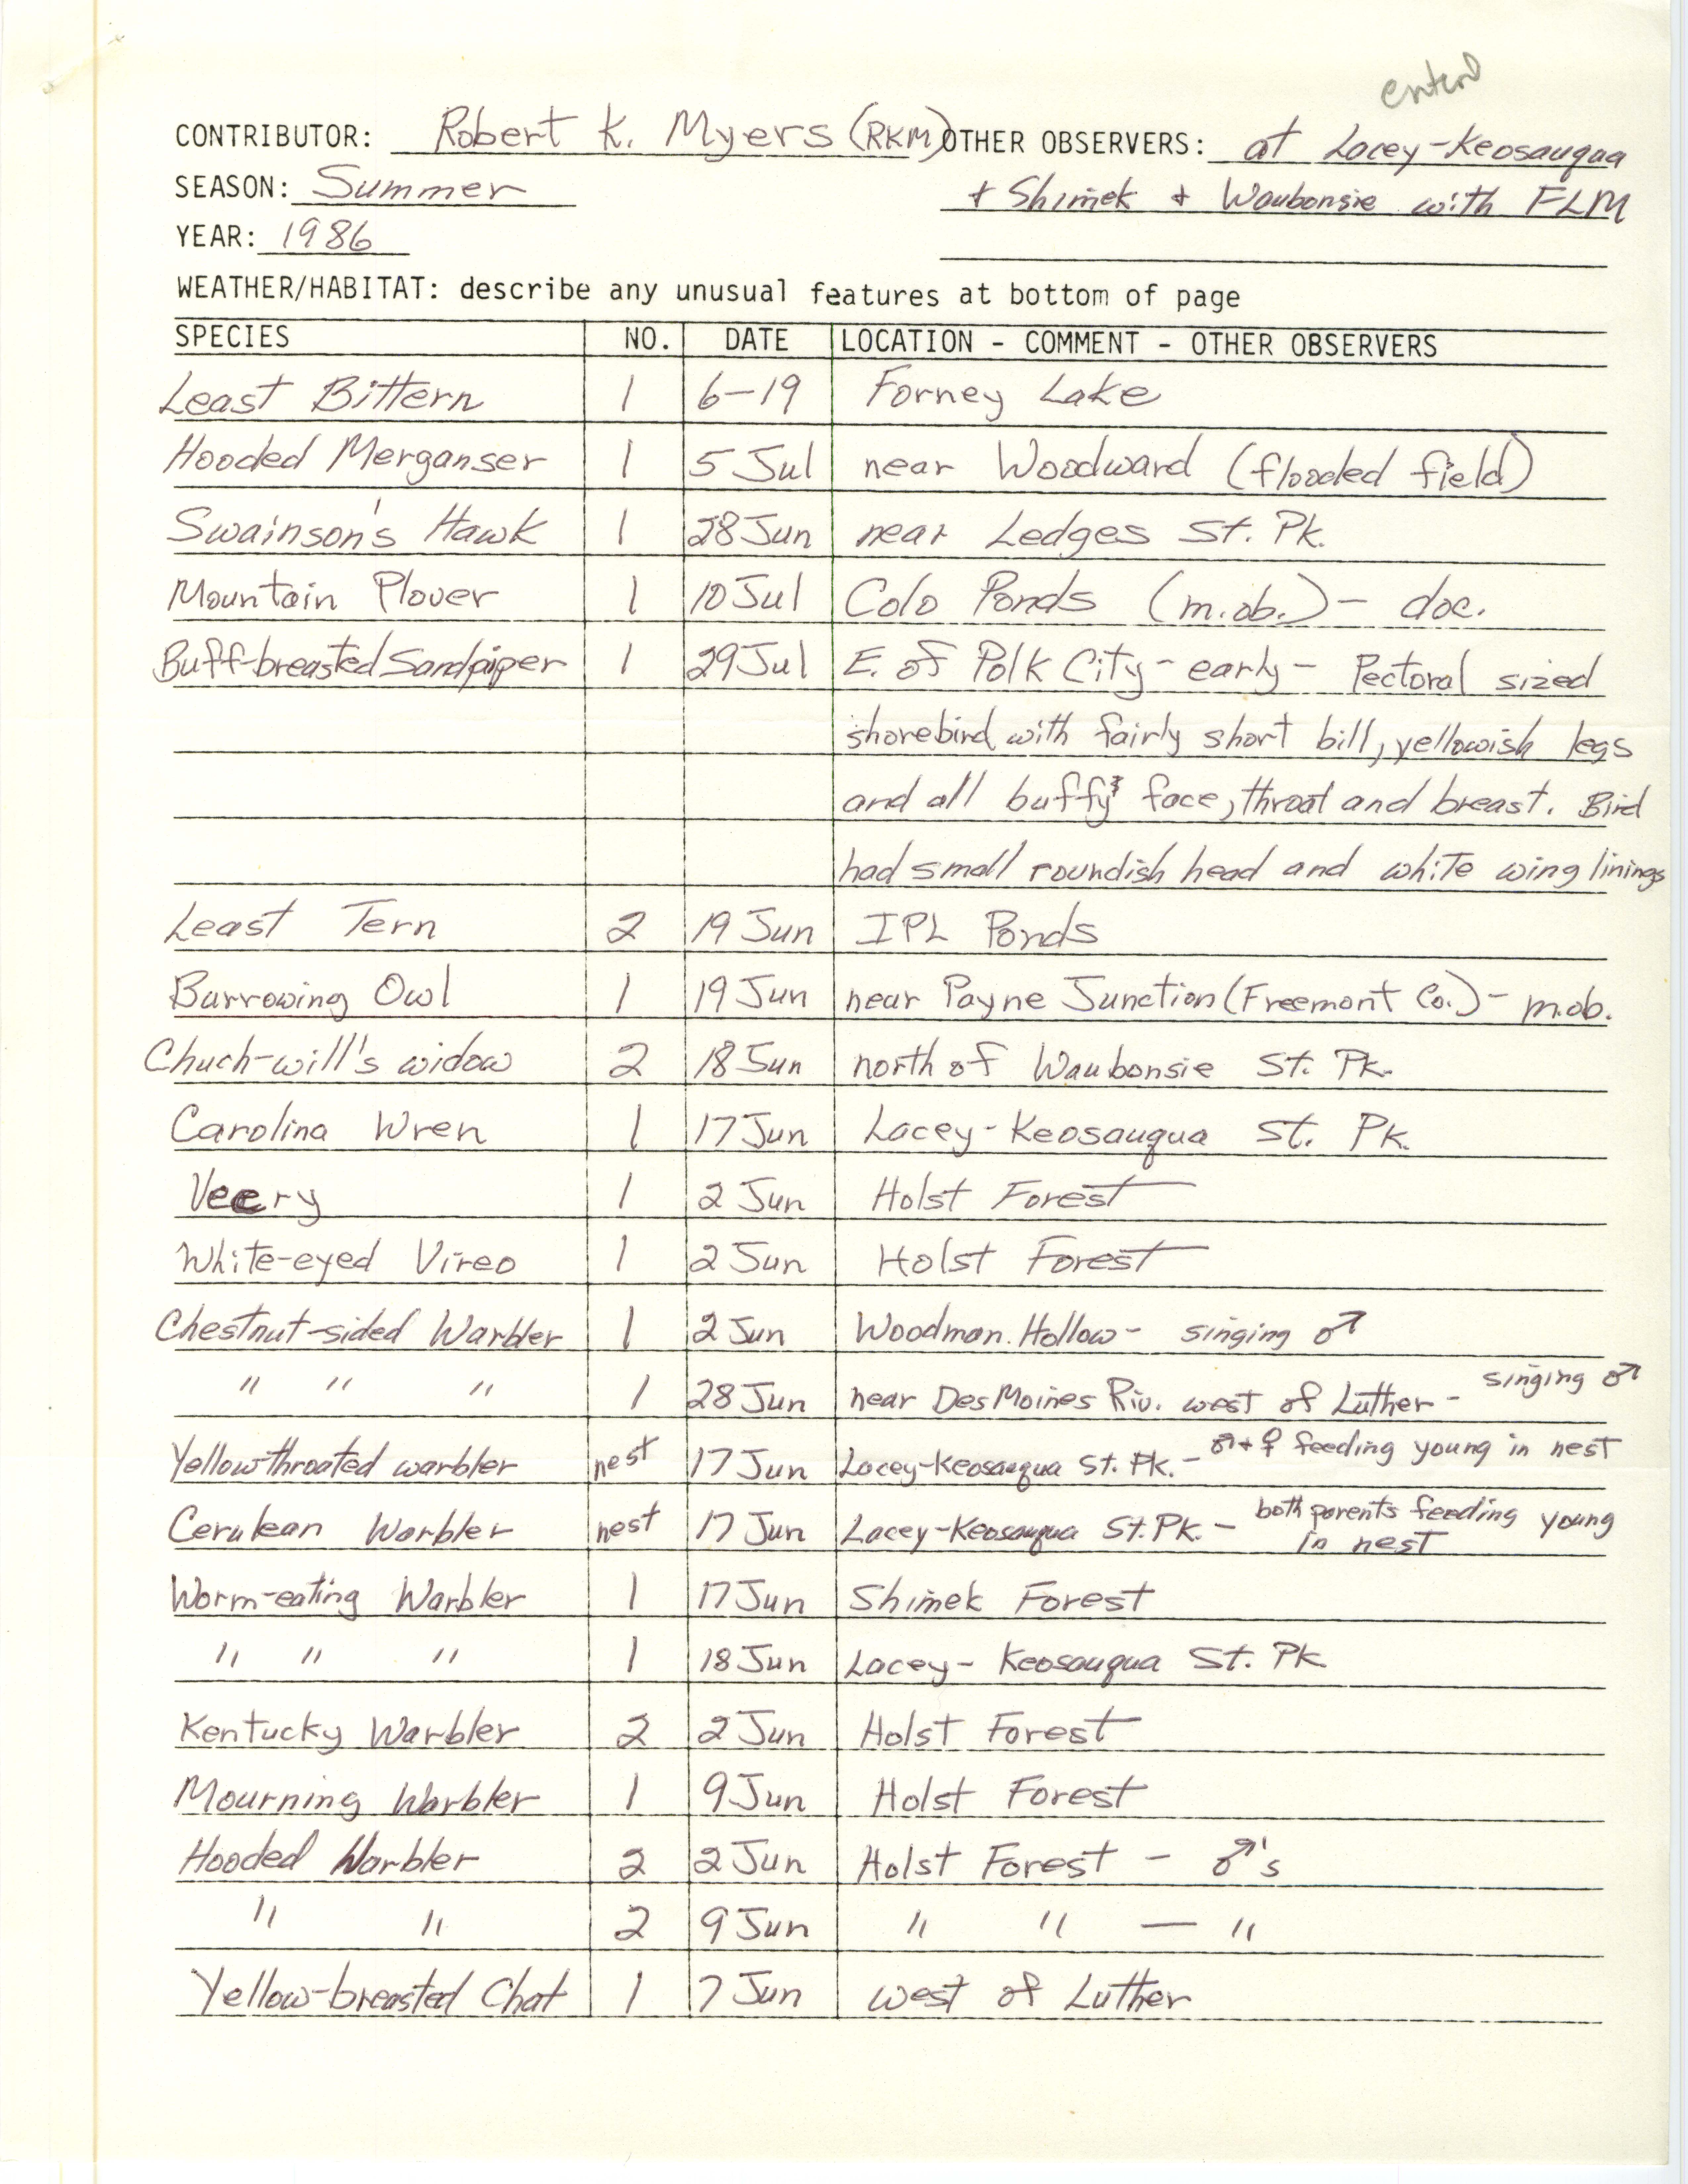 Field notes contributed by Robert K. Myers, summer 1986